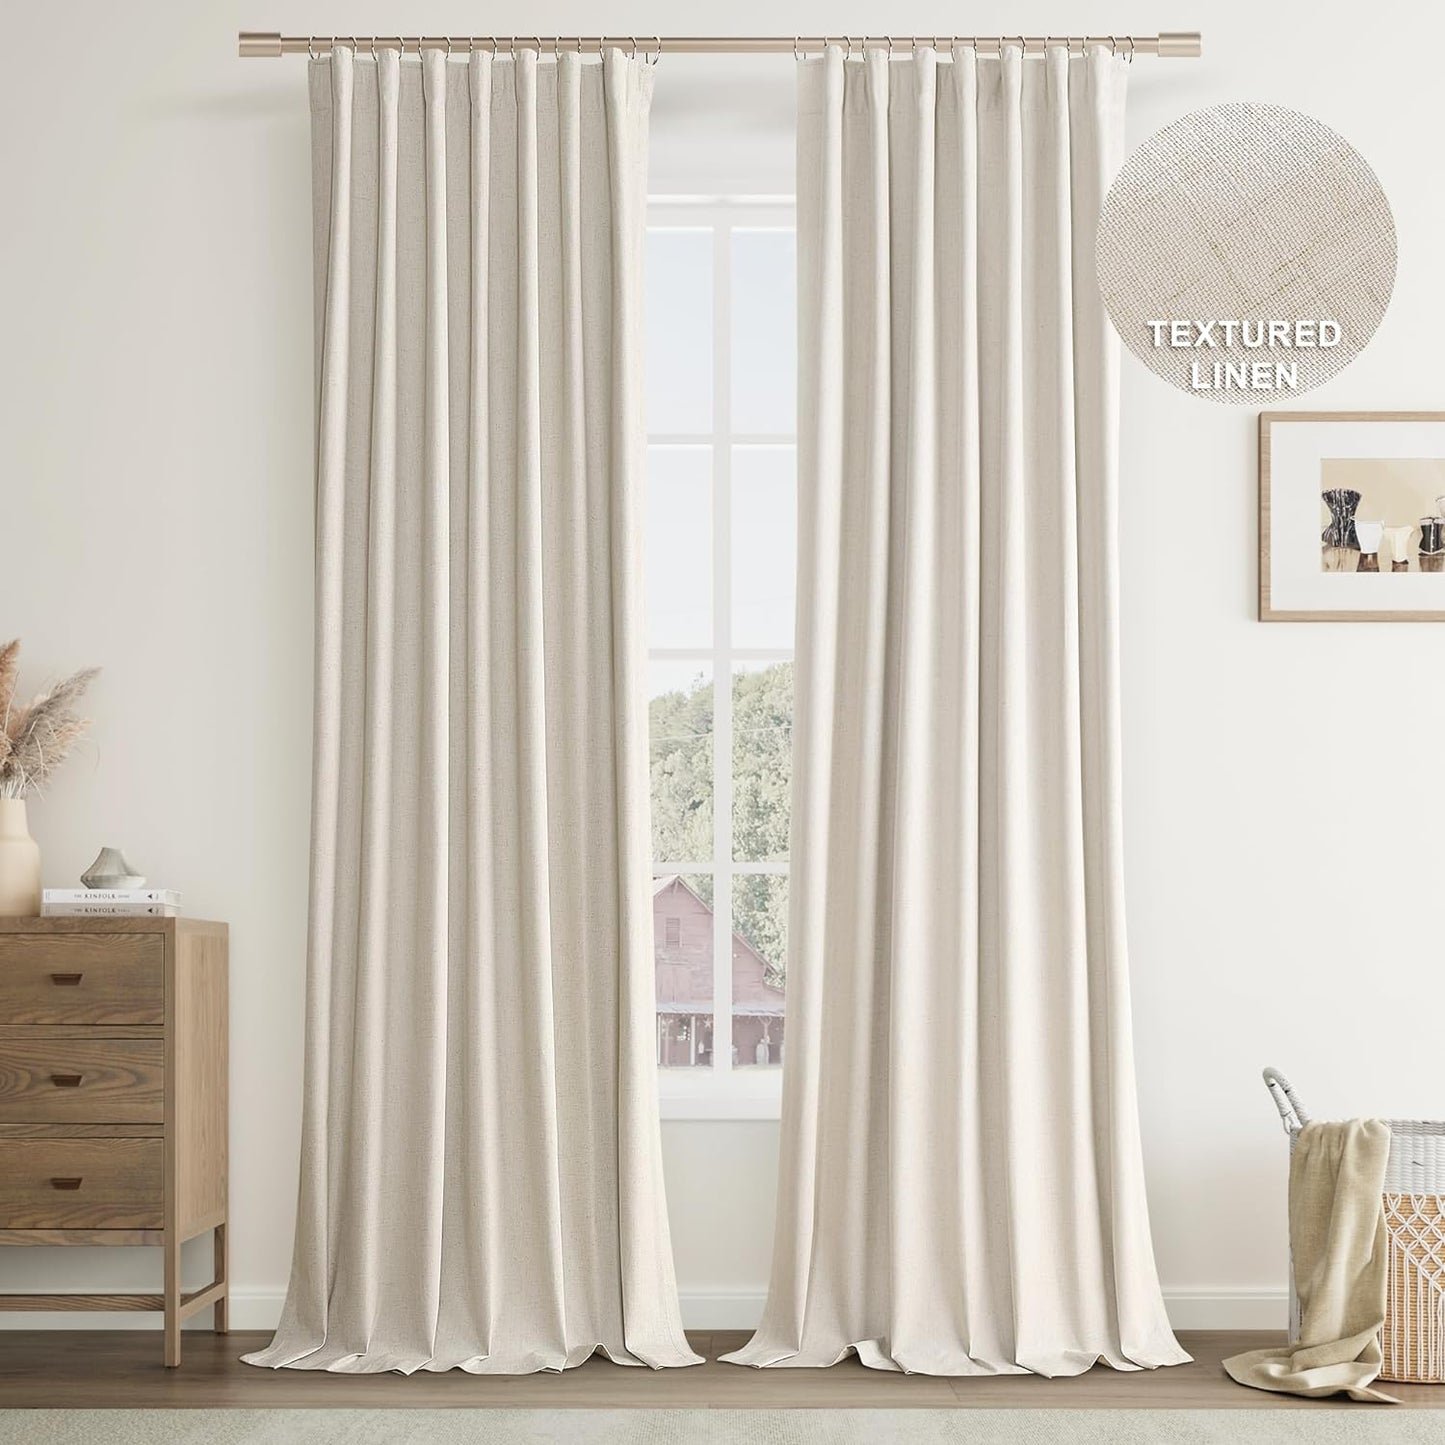 Joywell 100% Blackout Linen Curtains 102 Inches Long, Rod Pocket/Back Tab/Hook Belt/Clip Rings, Thermal Insulated Floor Length Drapes for Bedroom Dining Living Room(2 Panels,W52 X L102,Linen)  Joywell Grayish Brown 52W X 108L Inch X 2 Panels 